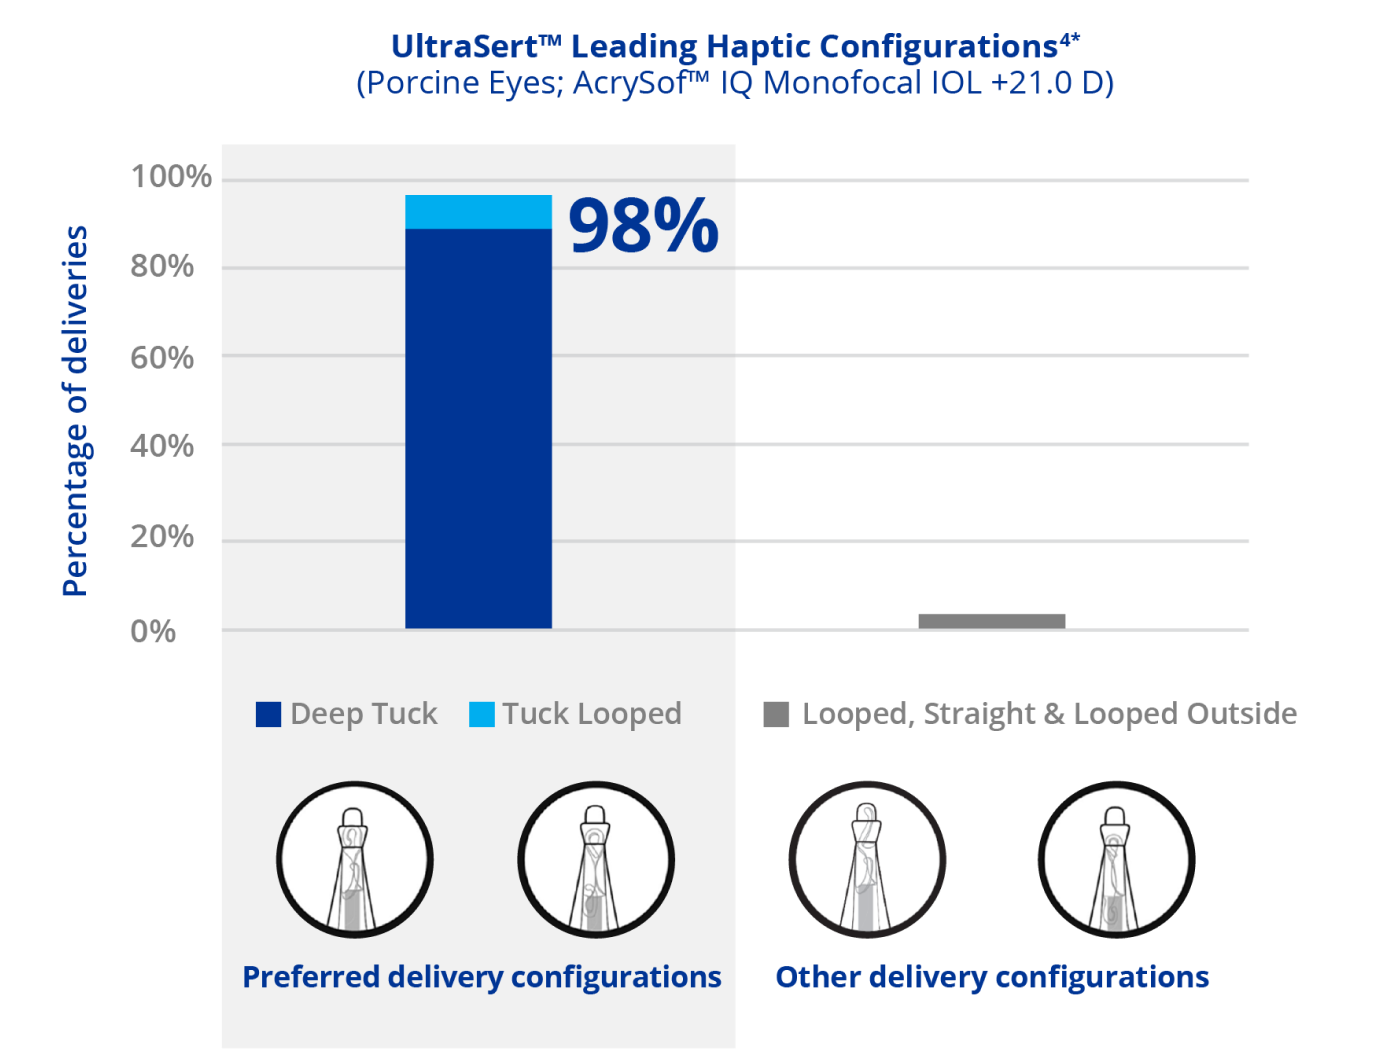 Bar graph illustrating UltraSert’s leading haptic configurations. The two preferred delivery configurations are deep tuck and tuck looped. The graph highlights that 98 percent of deliveries were performed with these delivery configurations.    The graph also displays the remaining 2 percent of other delivery configurations. These are looped, straight and looped outside configurations.